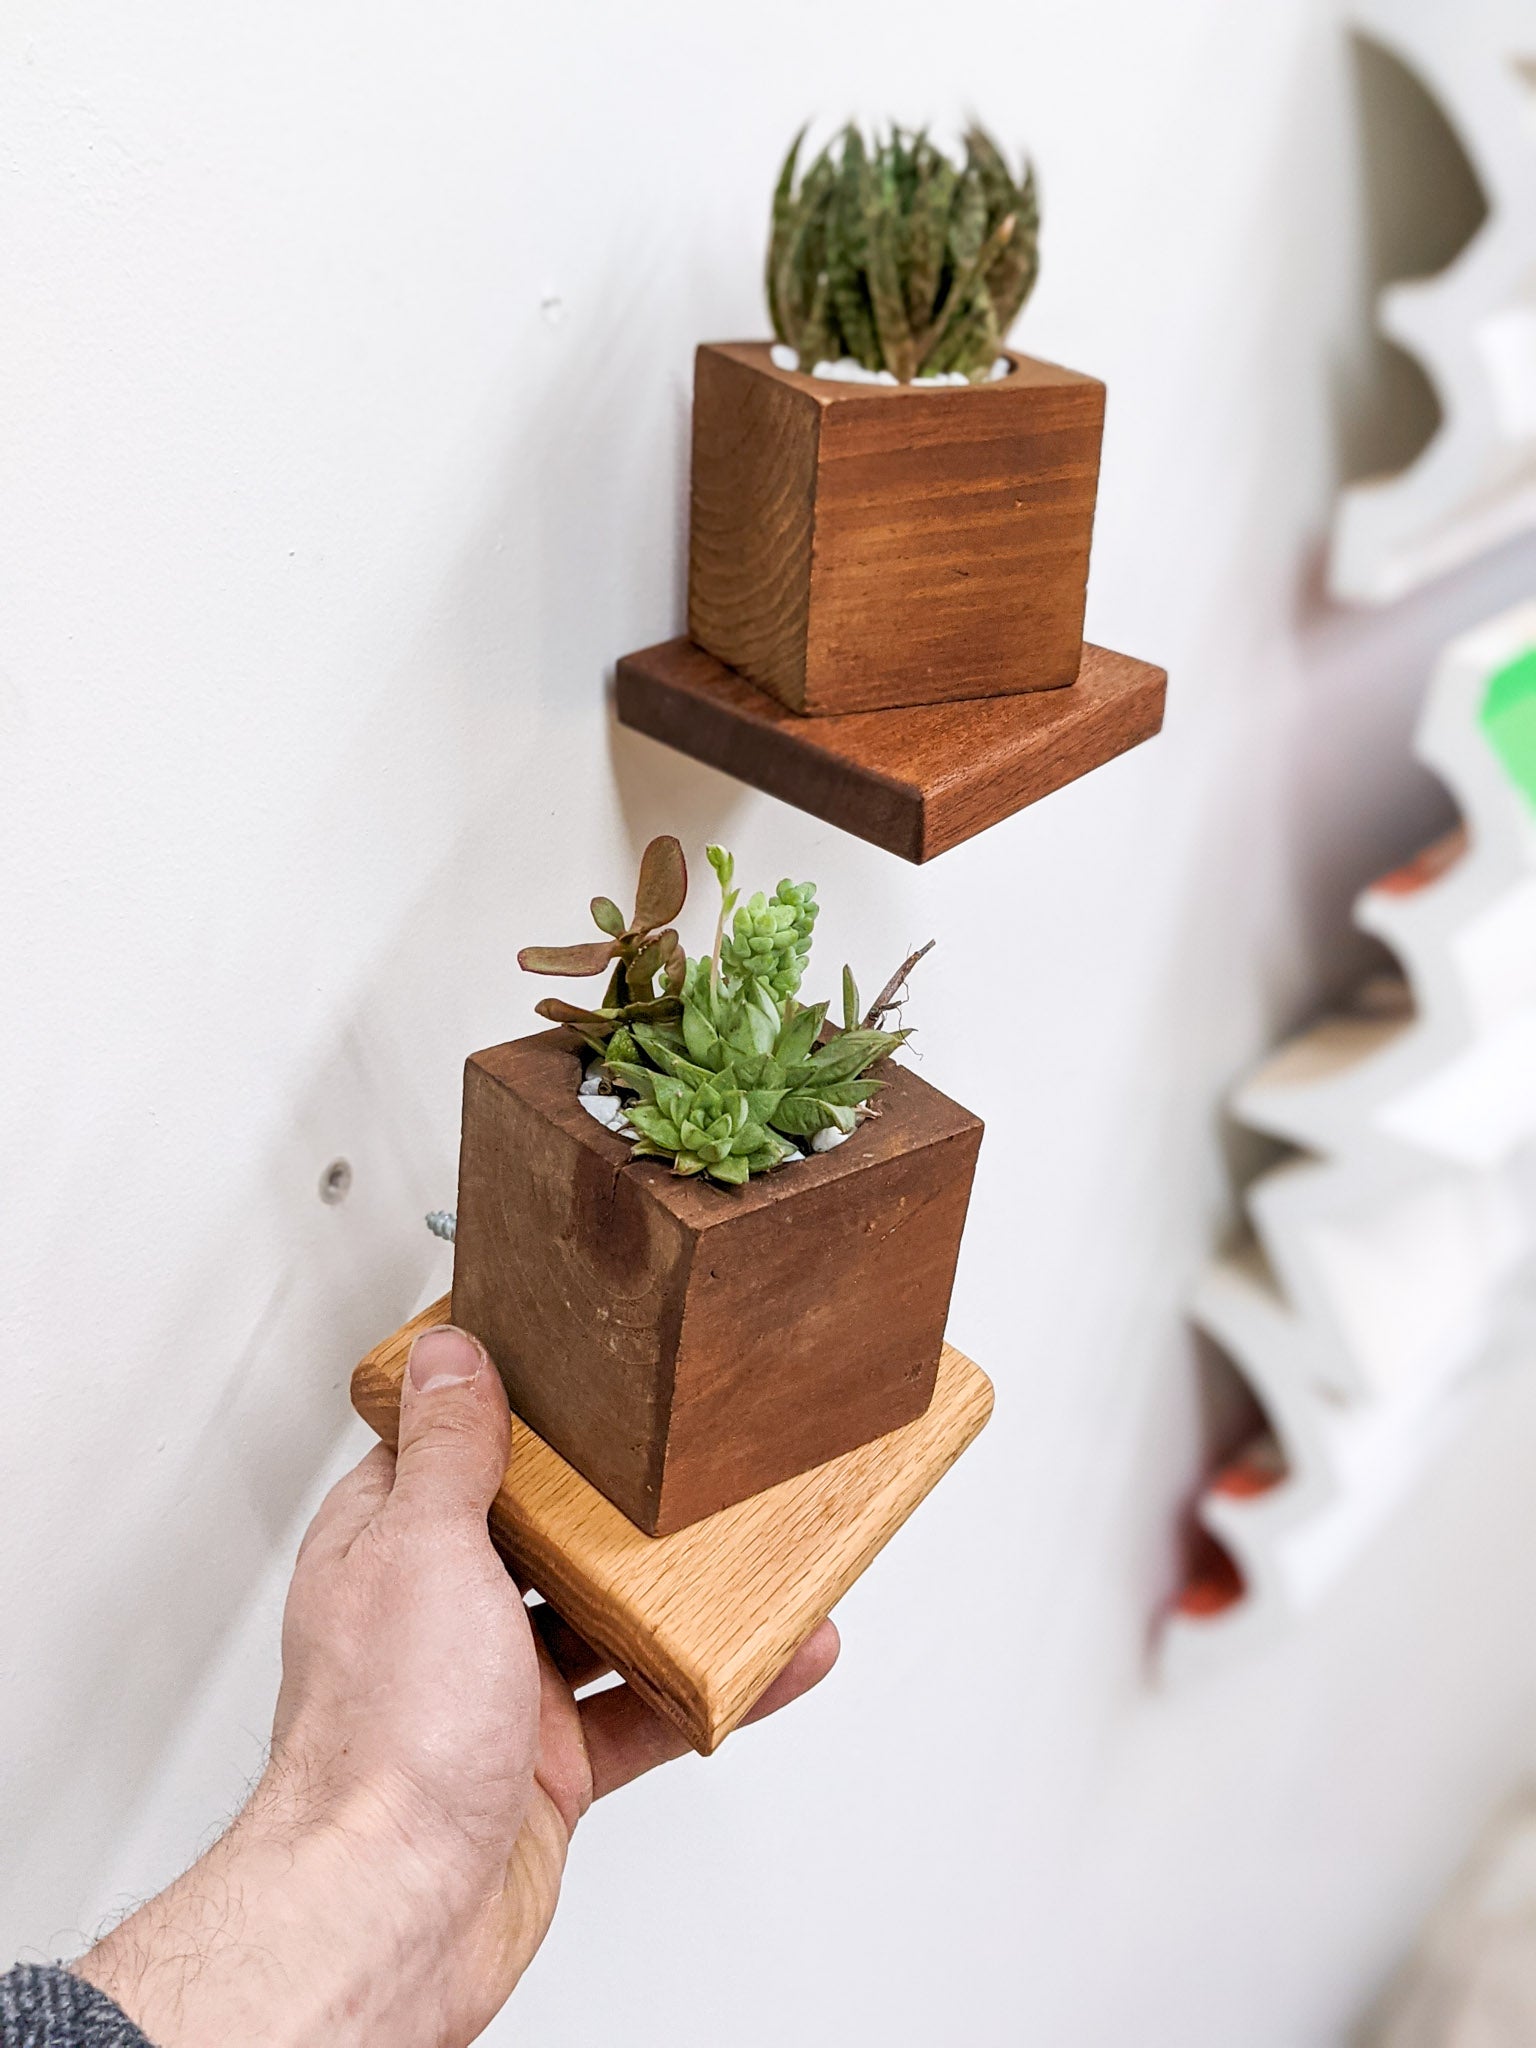 In the upper corner, a mahogany rhombus floating shelf is wall mounted with a mahogany planter on top holing various green succulents, below it, an oak rhombus floating wall shelf is easily installed with a mahogany succulent planter on top